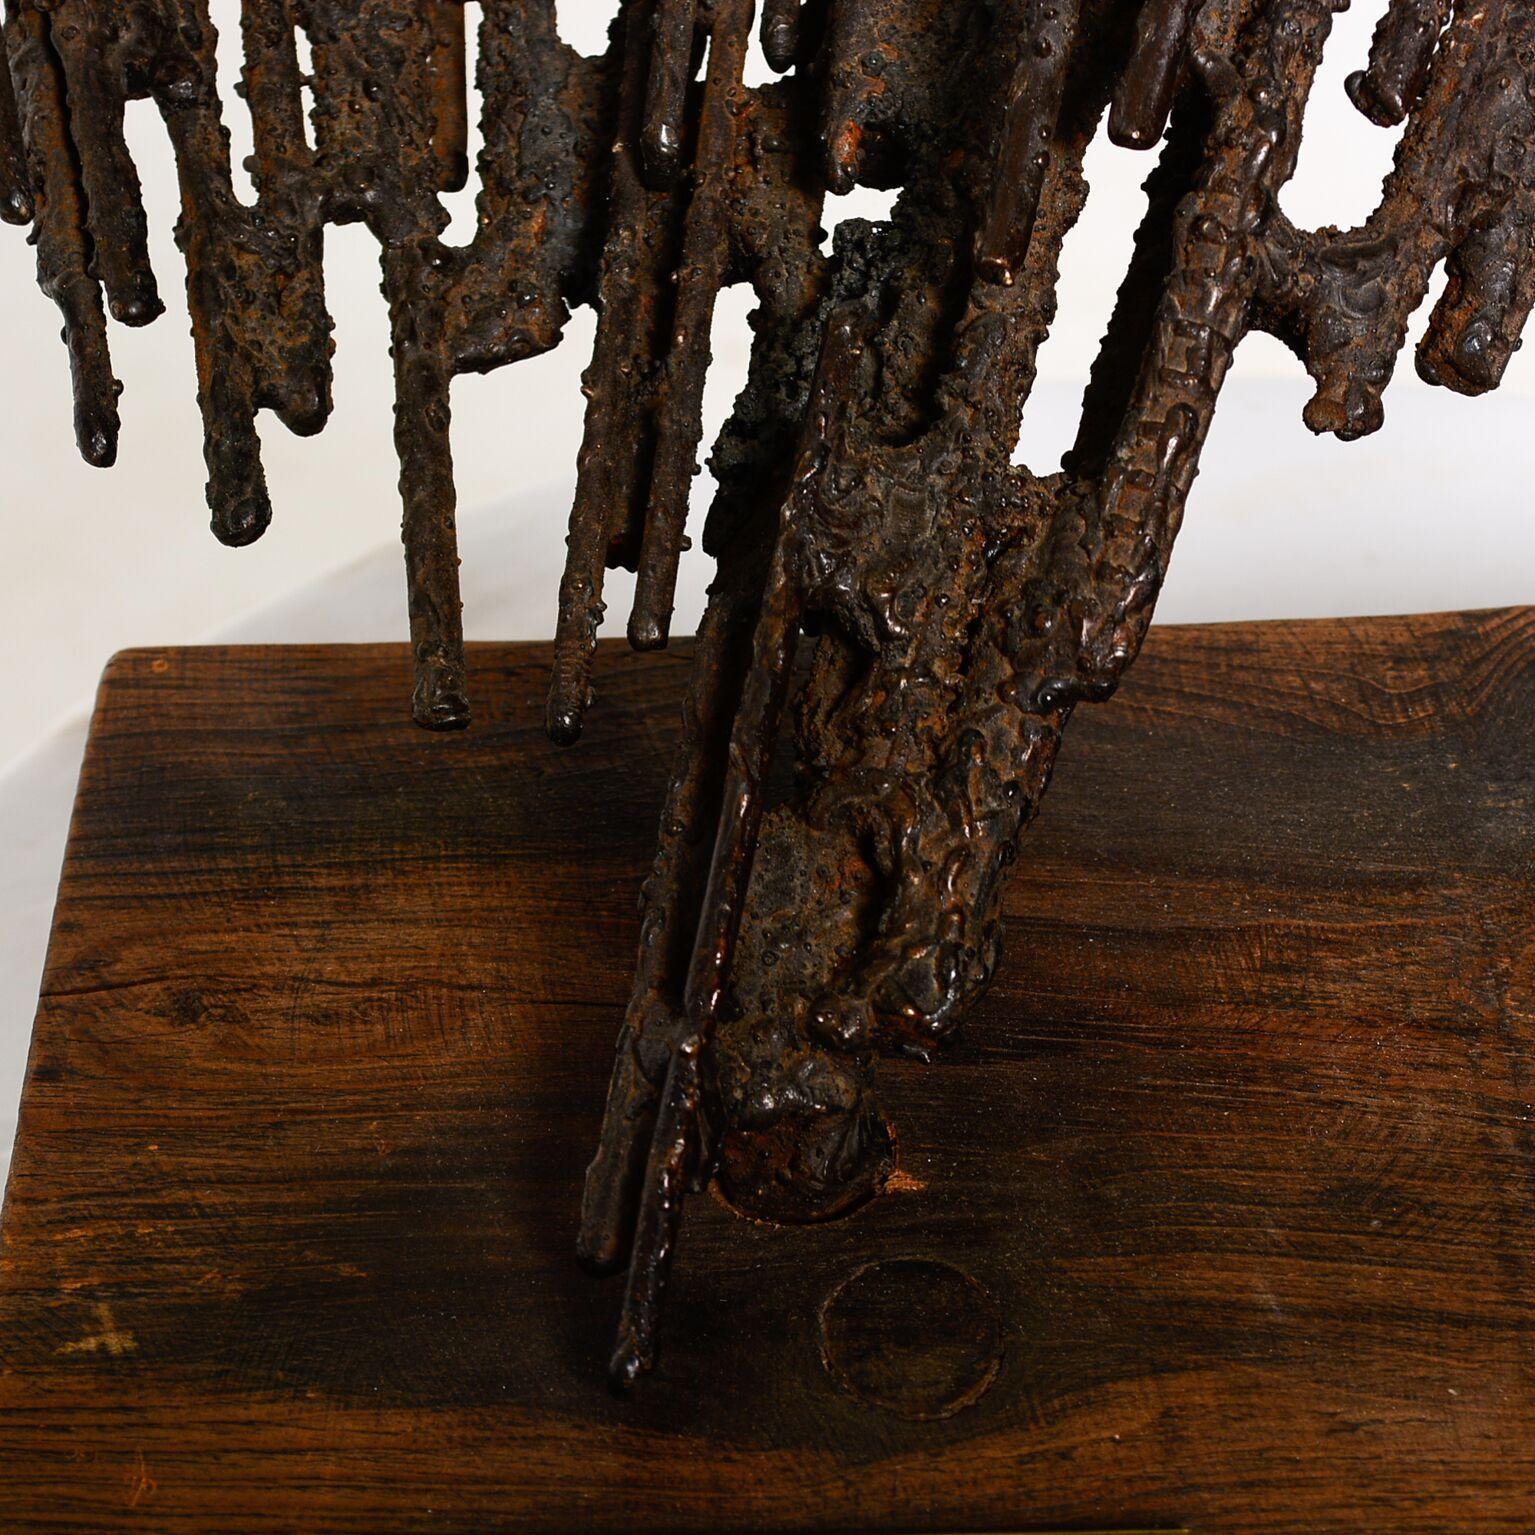 Late 20th Century Jorge Stanyo Kaminsky Mexican Modern Abstract Brutalist Iron Sculpture 1977